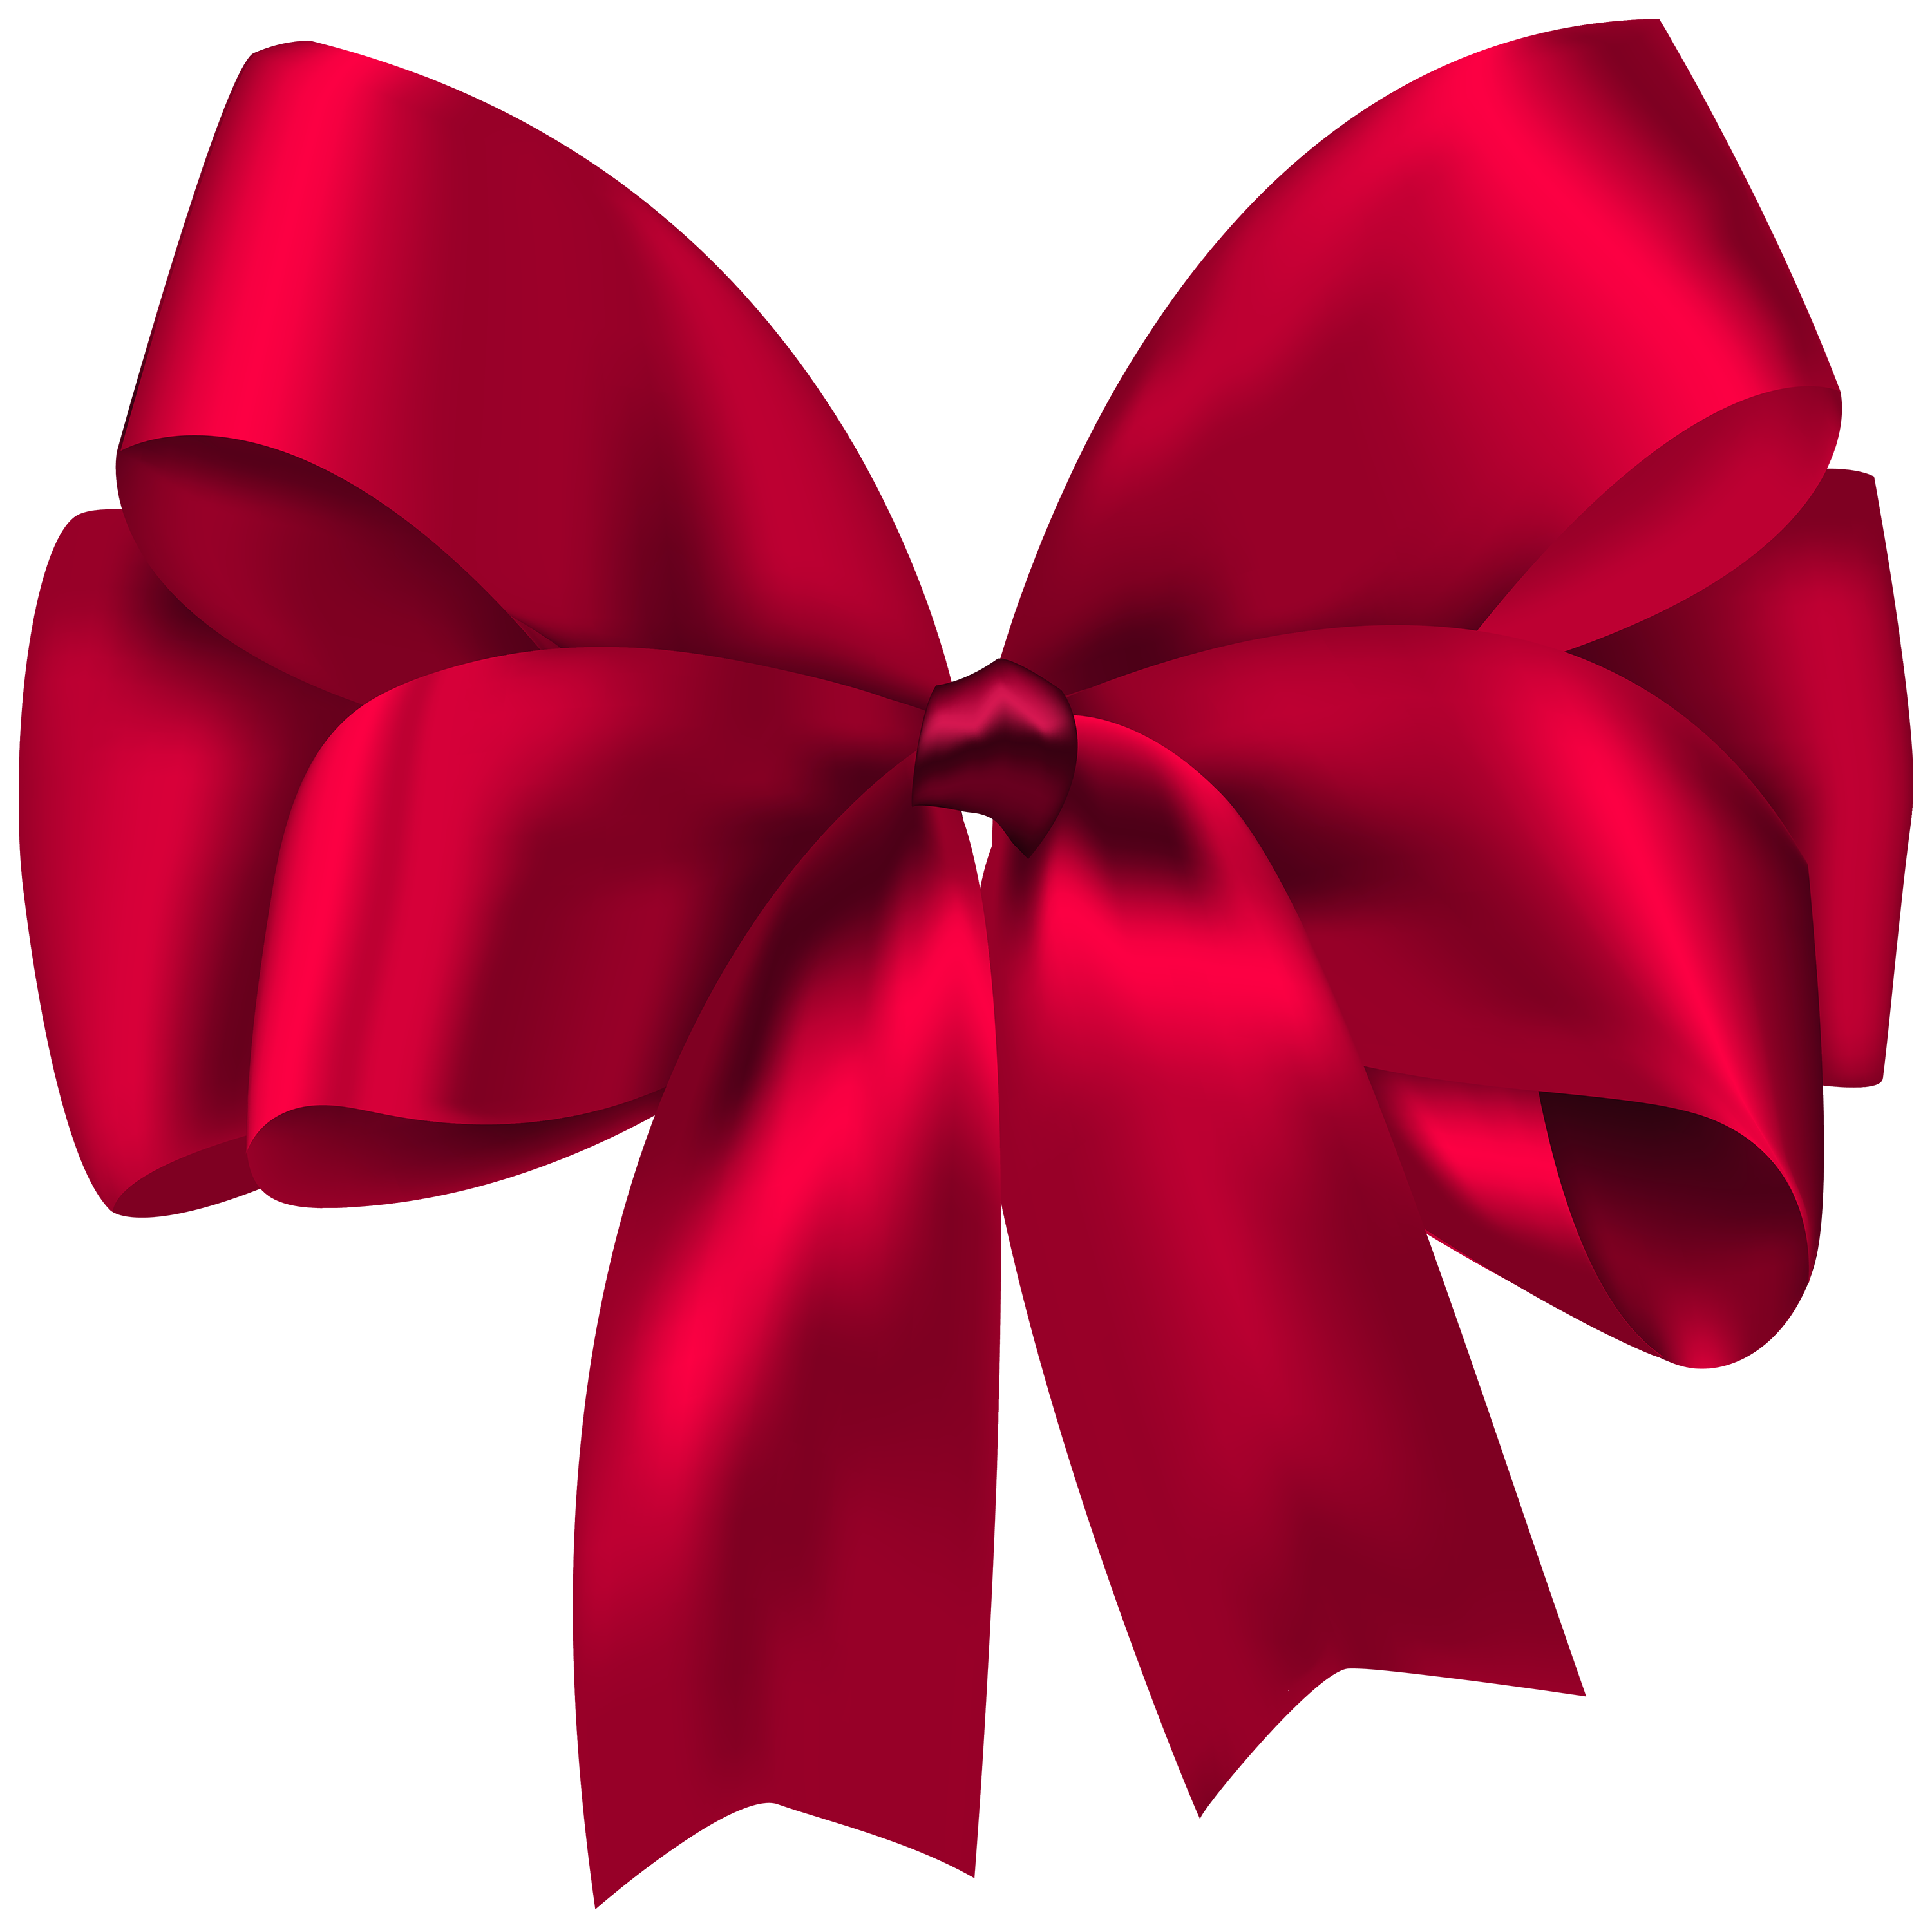 red ribbons png